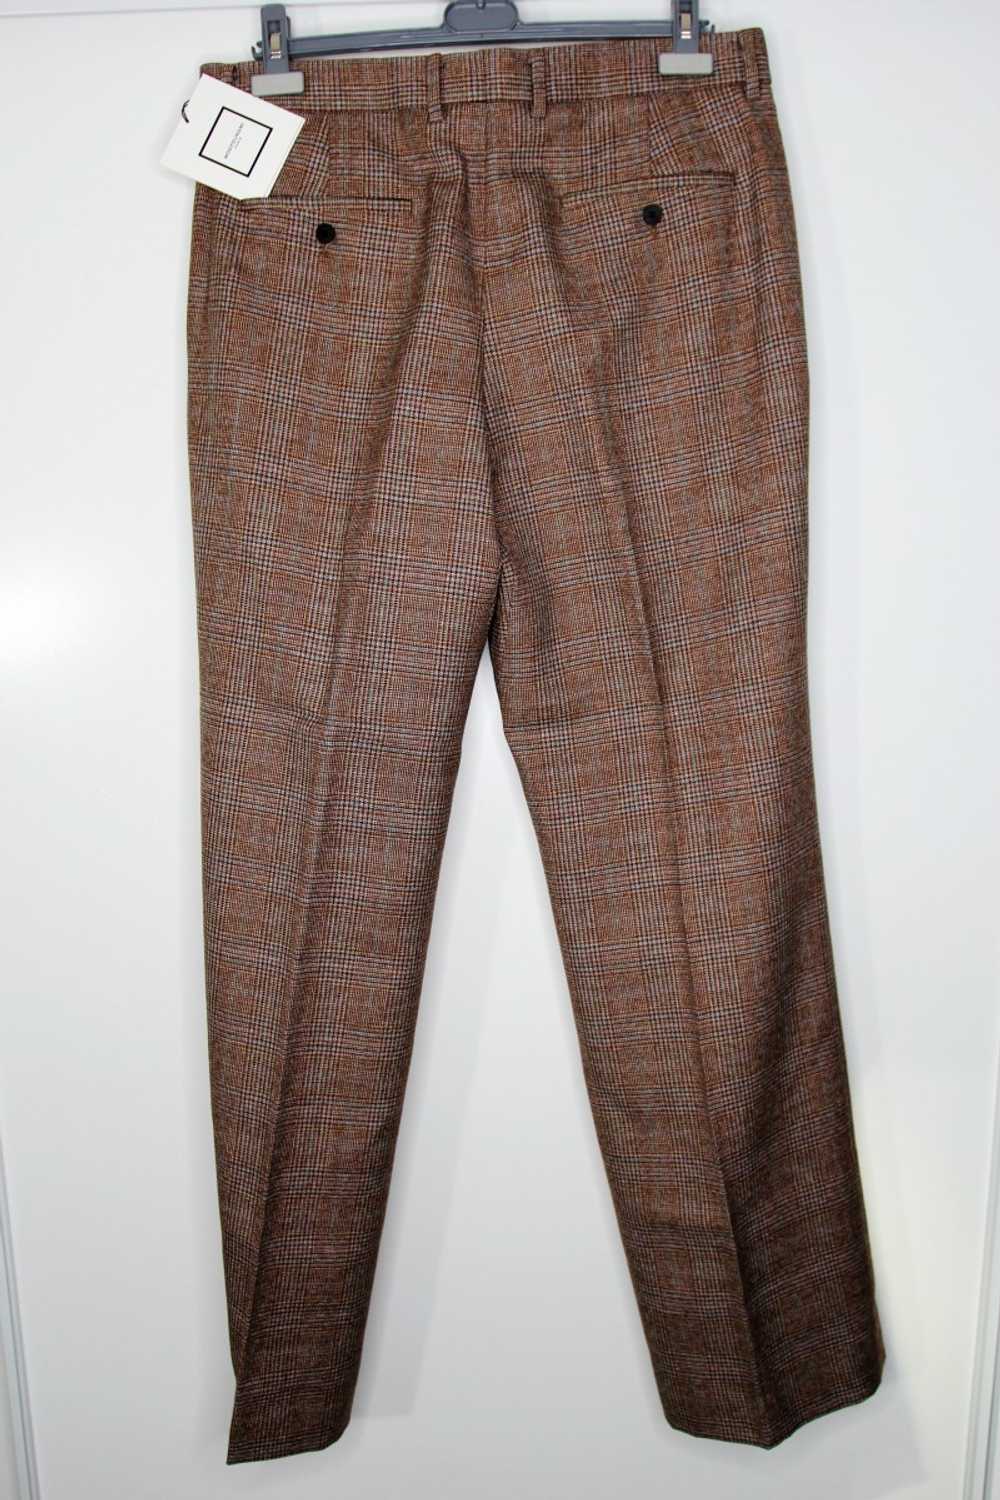 BNWT AW20 WOOYOUNGMI PRINCE OF WALES PANTS 48 - image 3